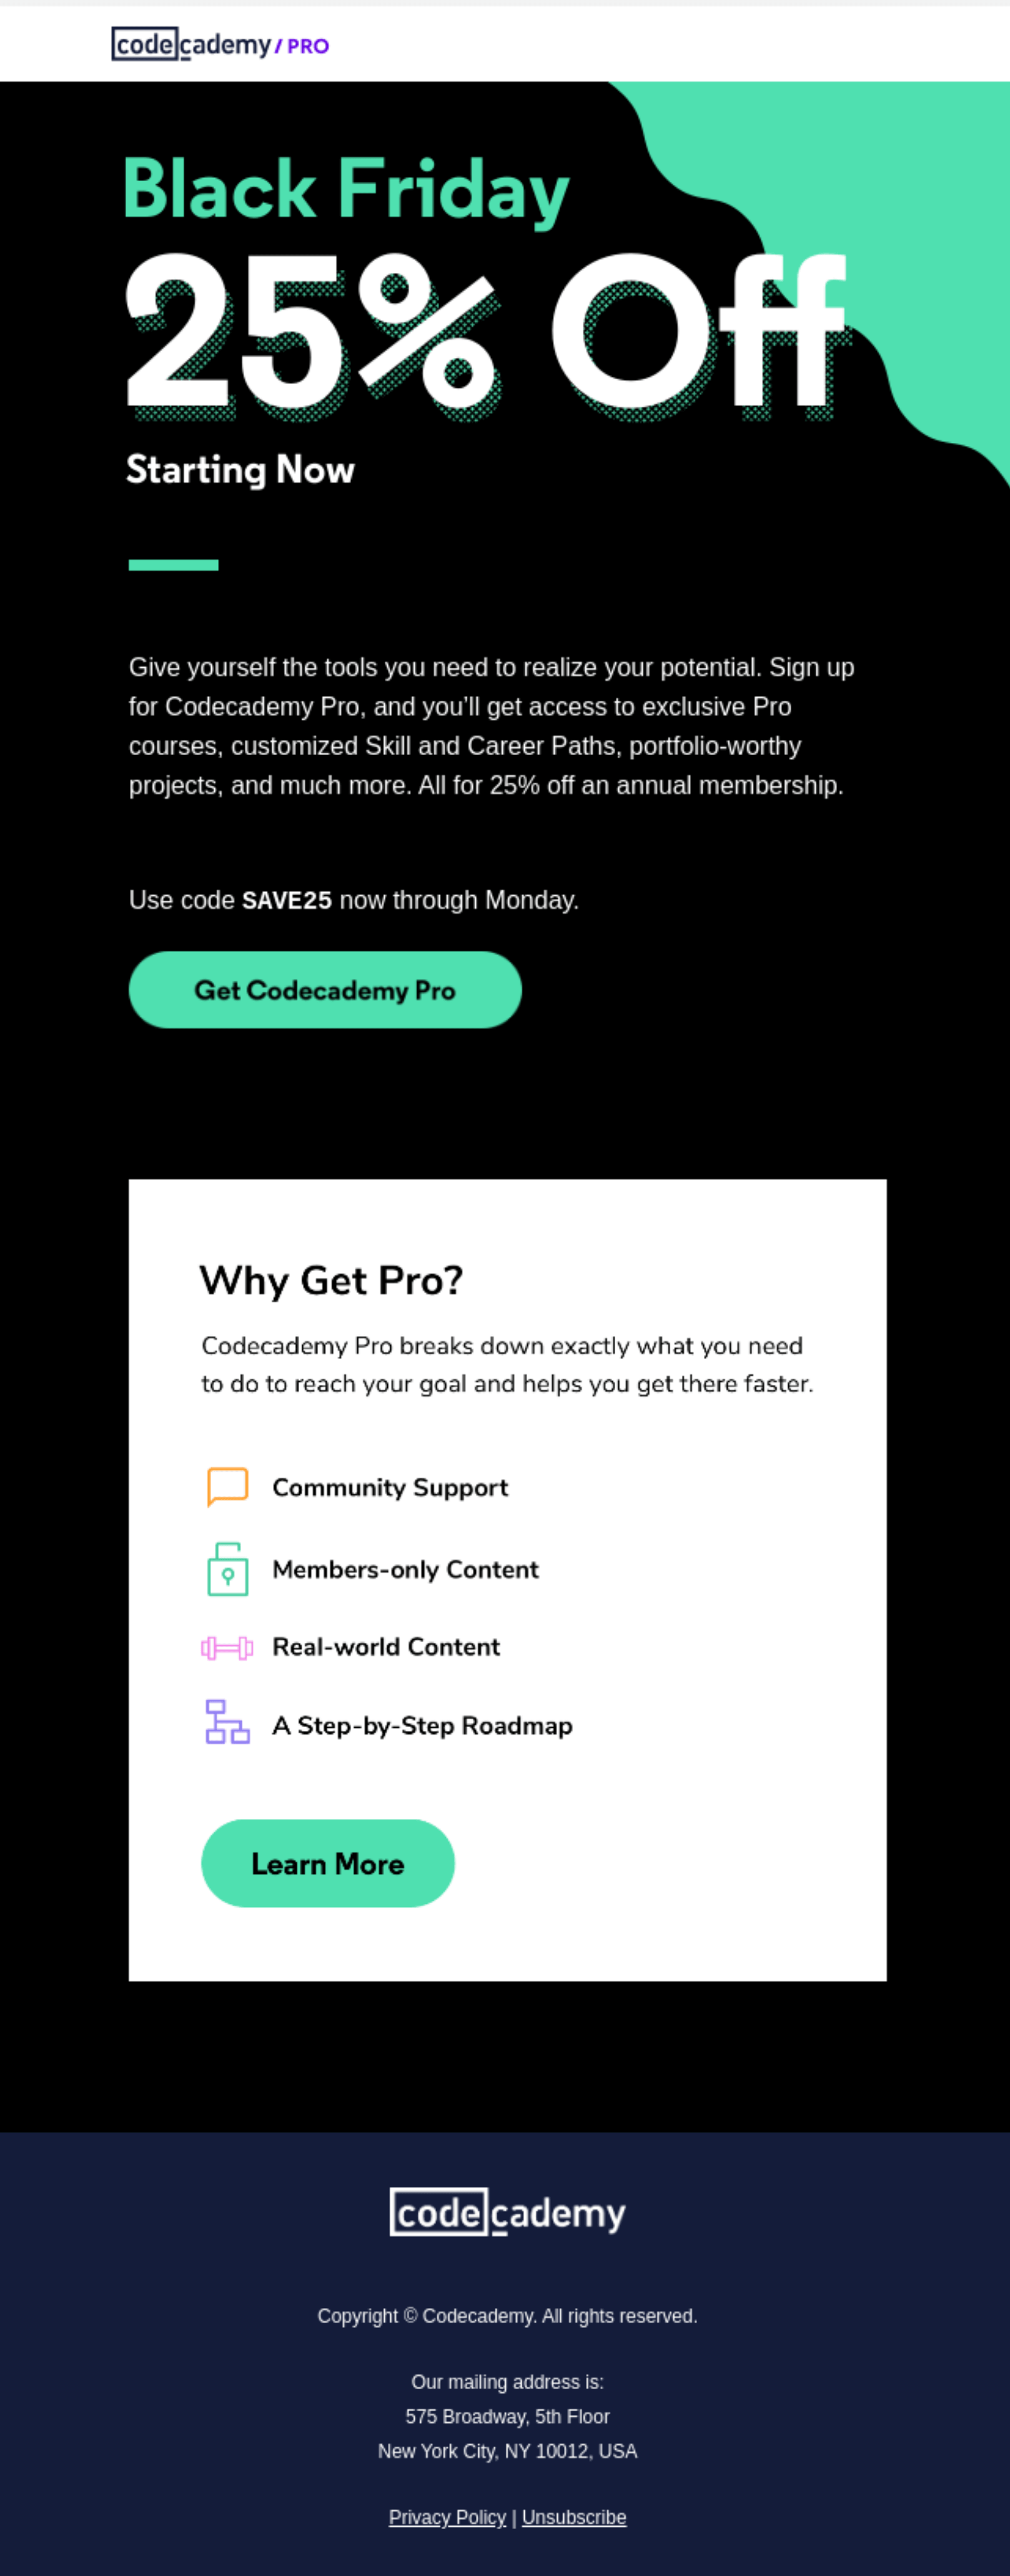 A Black Friday email from Codecademy